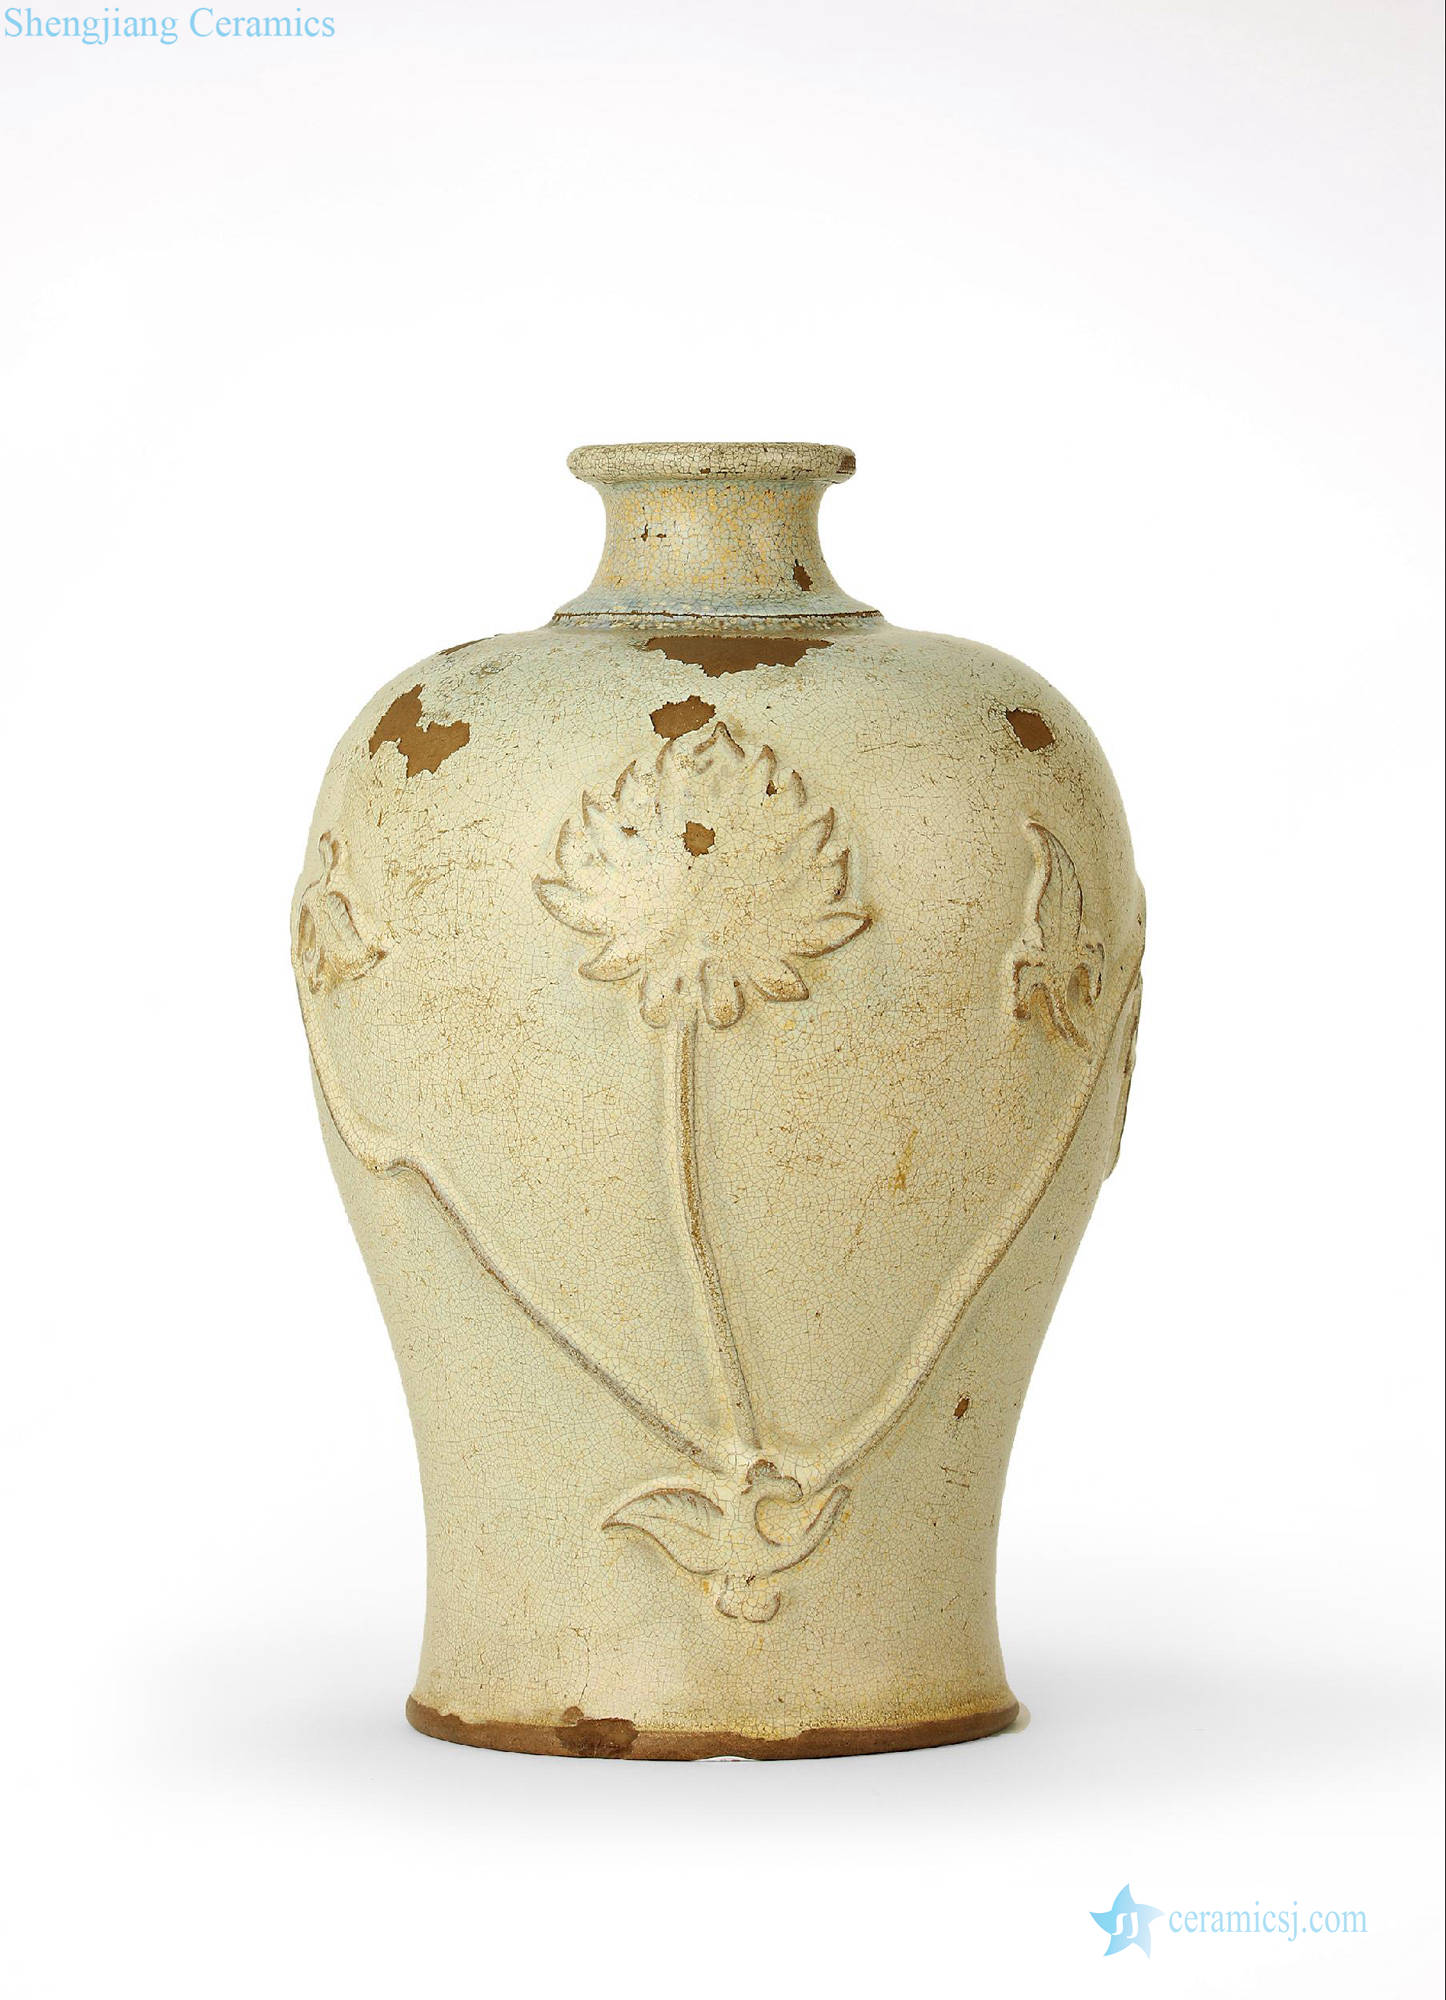 In the late Ming White glazed relief passionflower mei jun month bottle